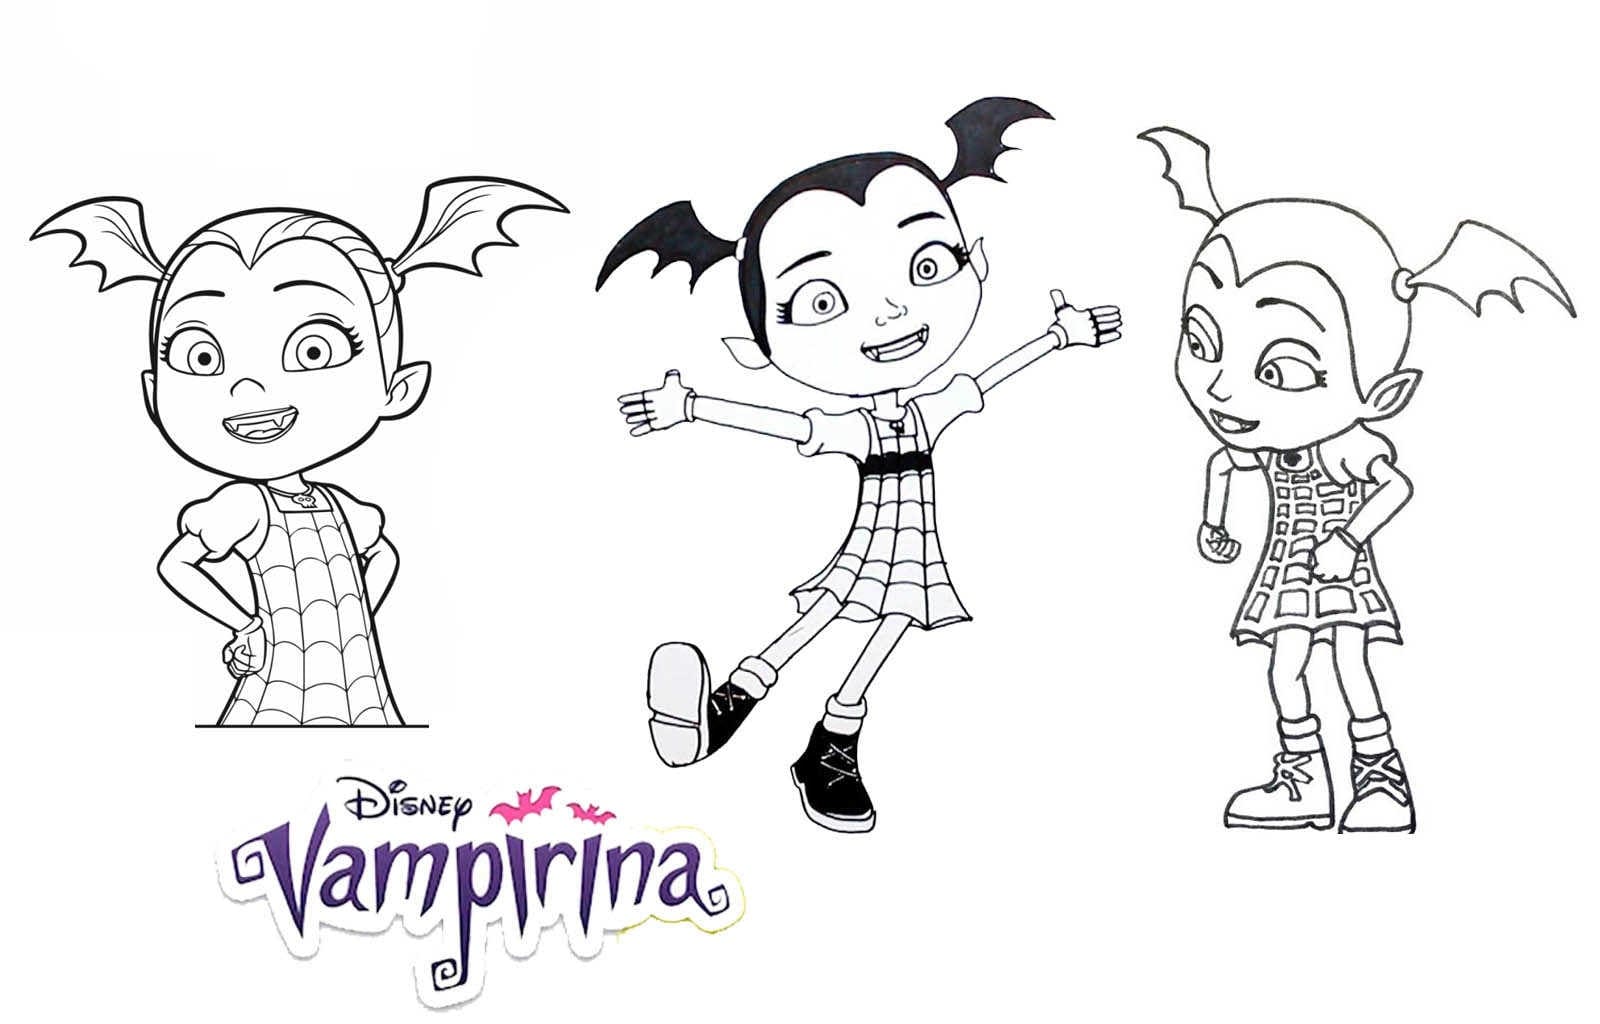 Delightful Vampirina From Different Angles Coloring Pages